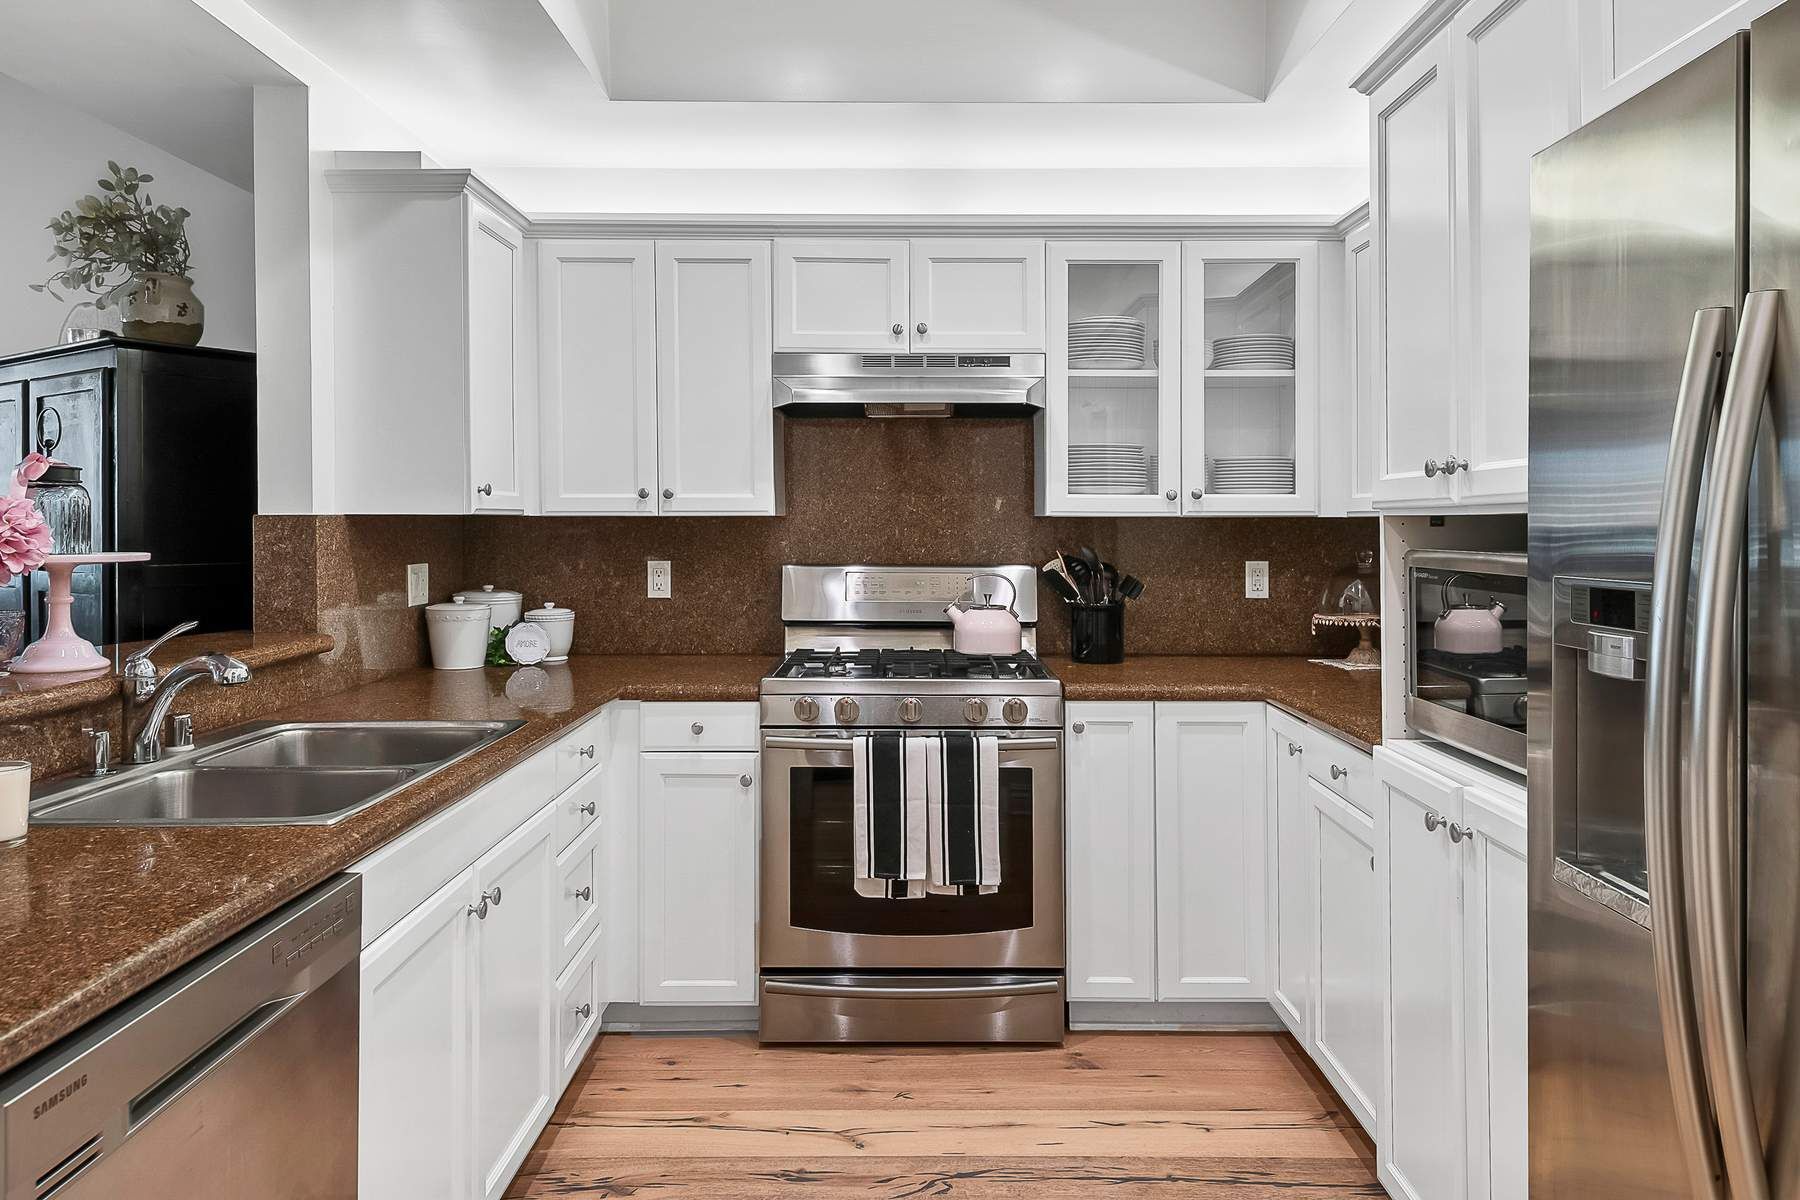 The Chef’s Kitchen comes complete with stainless appliances & breakfast bar.